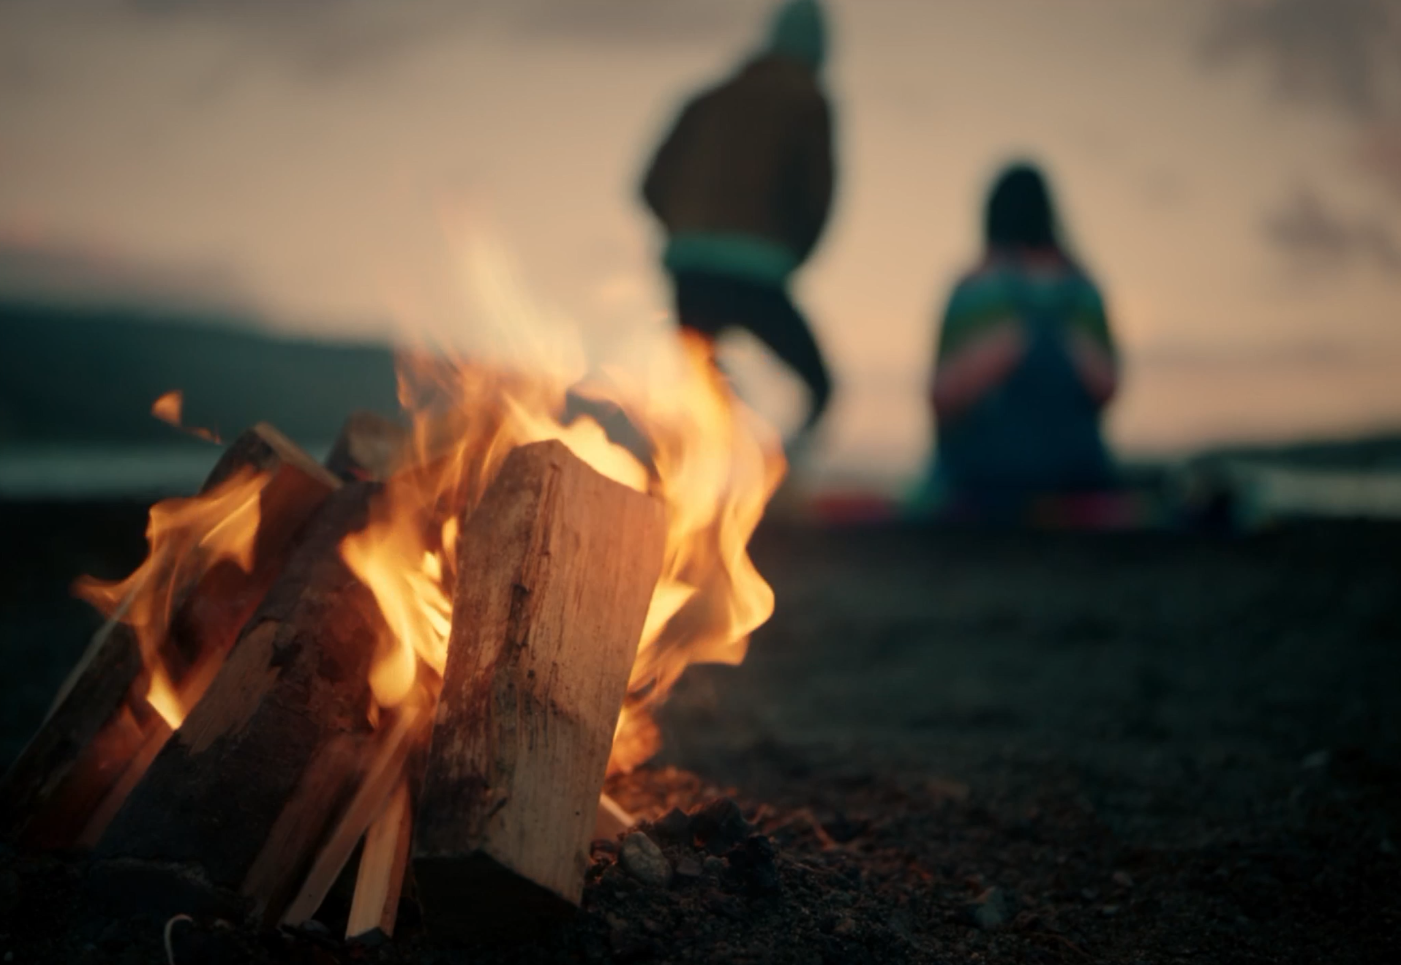 Picturesque Short Film - A shot of a fire with two people by a lake